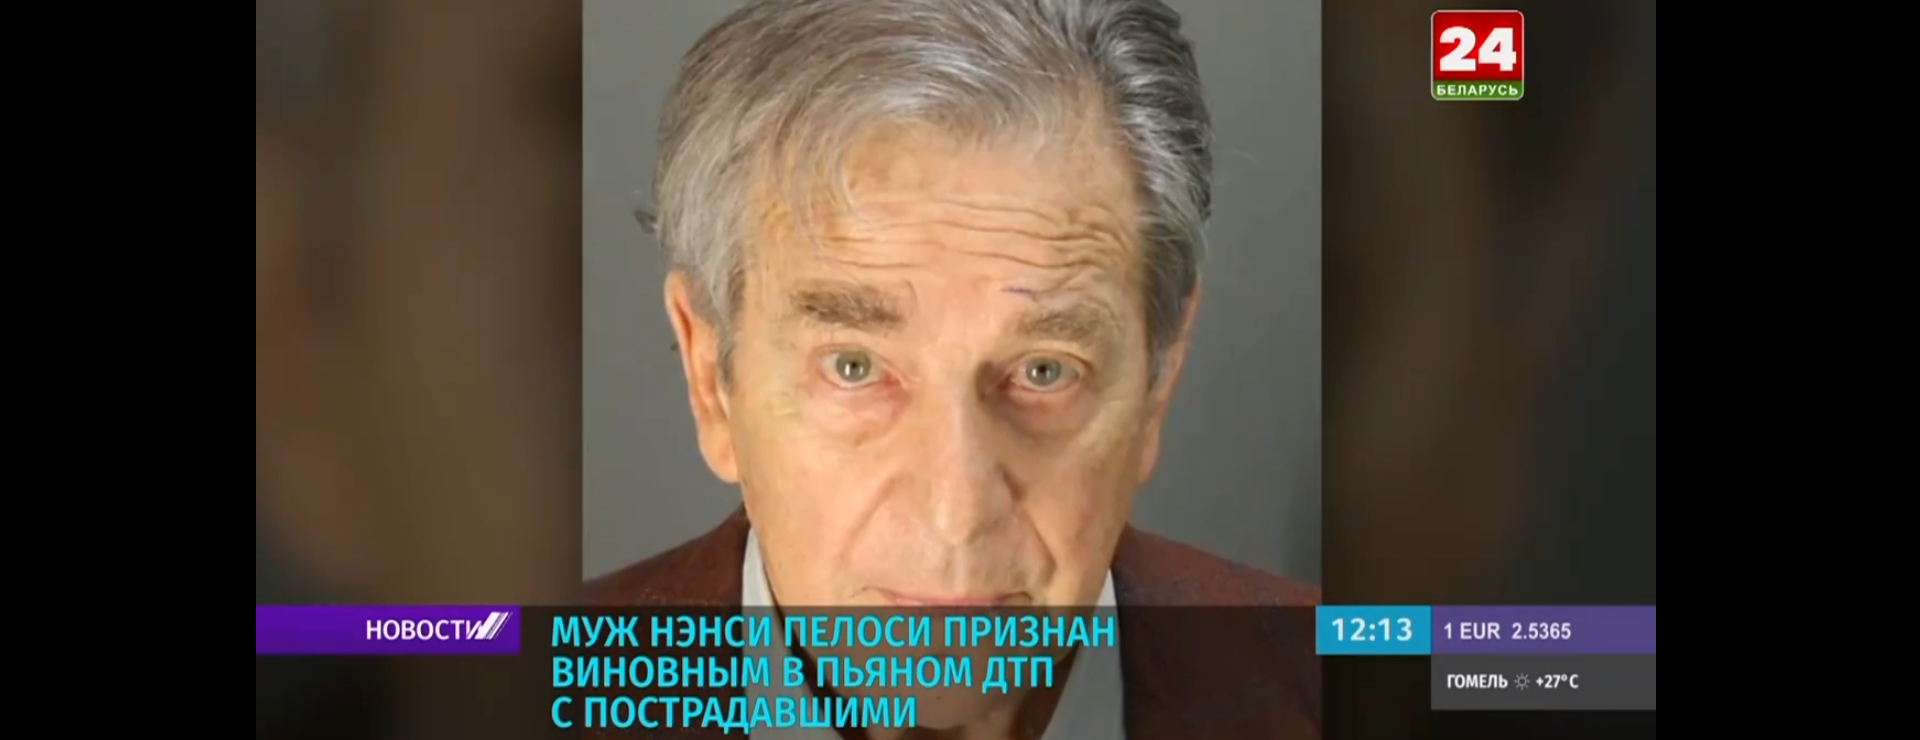 Paul Pelosi DUI Story Featured On Belarusian Television News